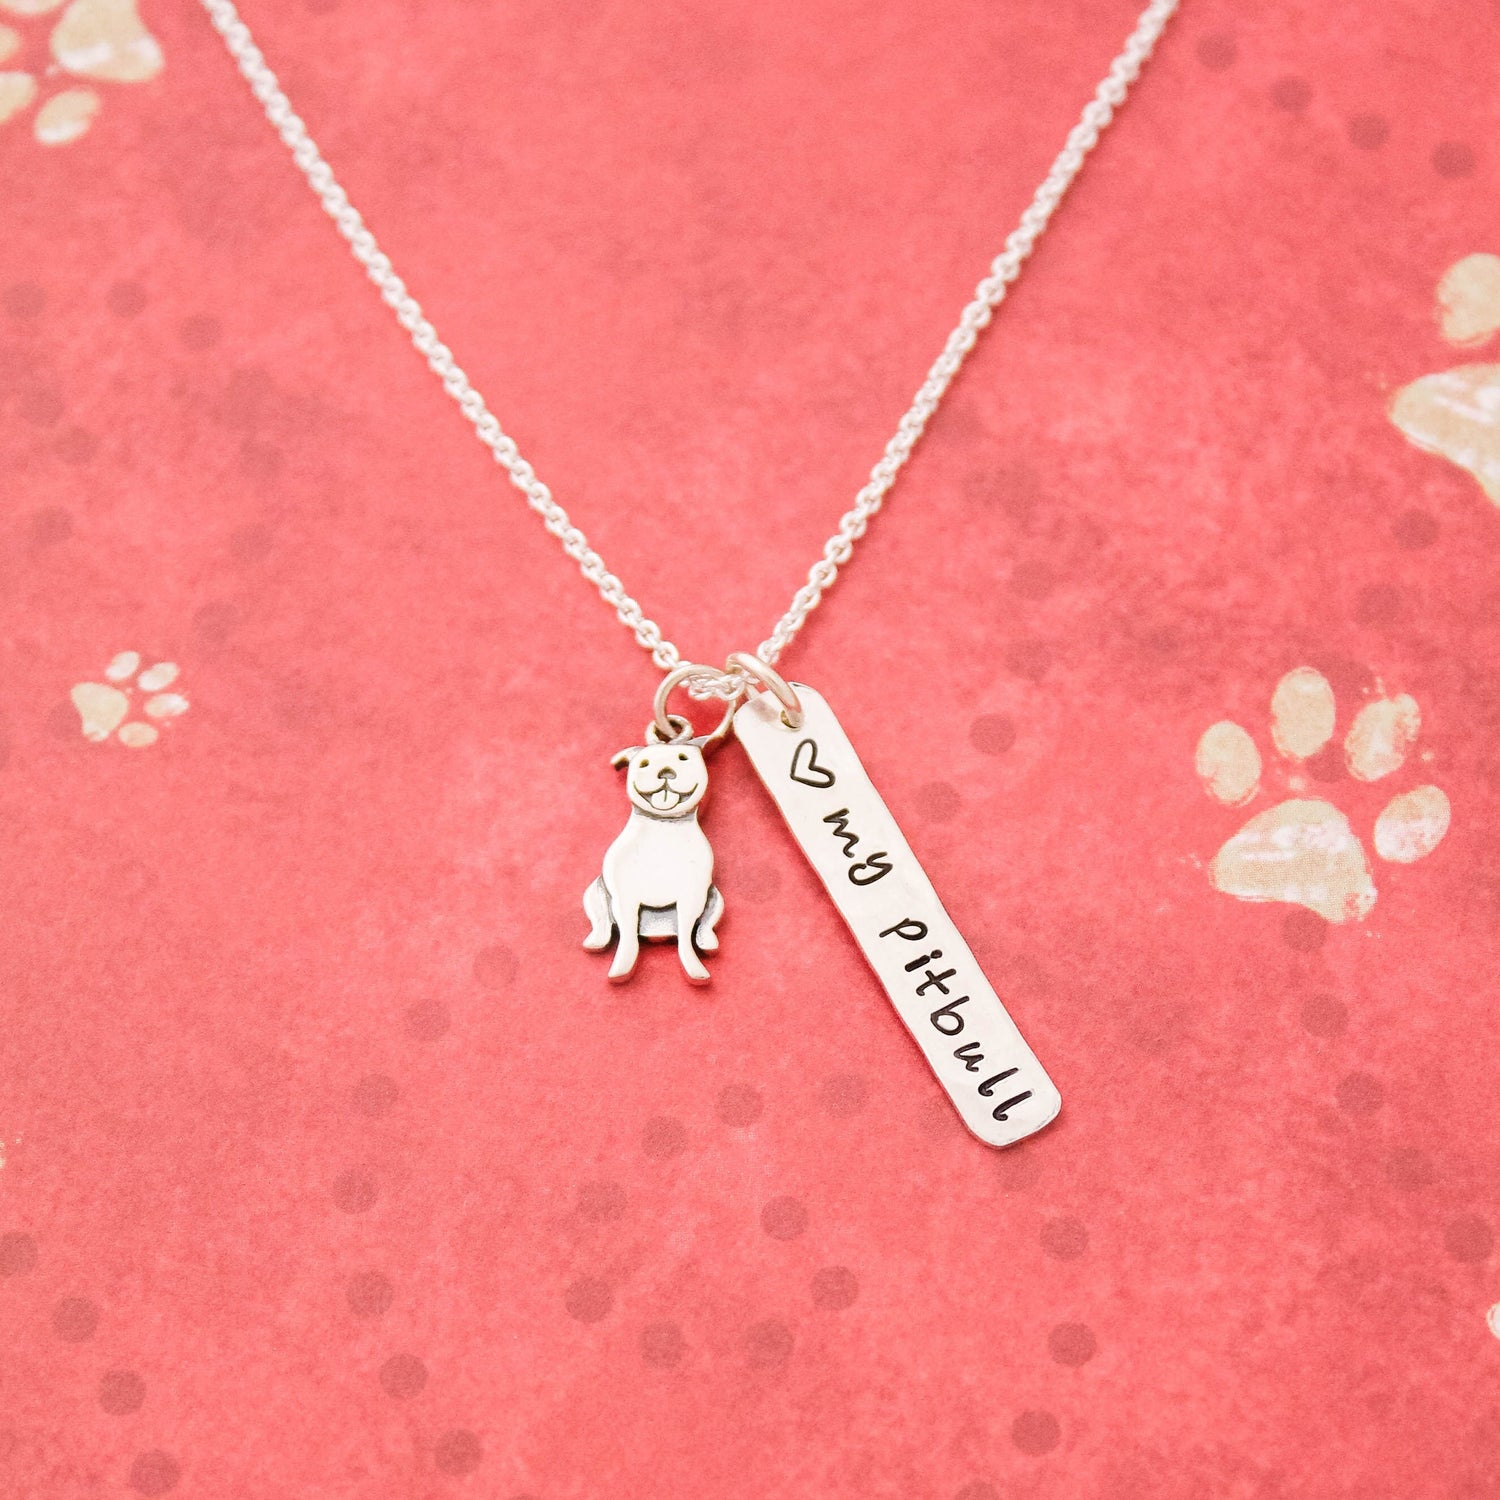 LOVE my PITBULL Necklace, Sterling Silver Pitbull Dog Necklace, Pitbull Lover Gift, New Pet Gift, Pitbull Jewelry, Hand Stamped Pitbull Gift